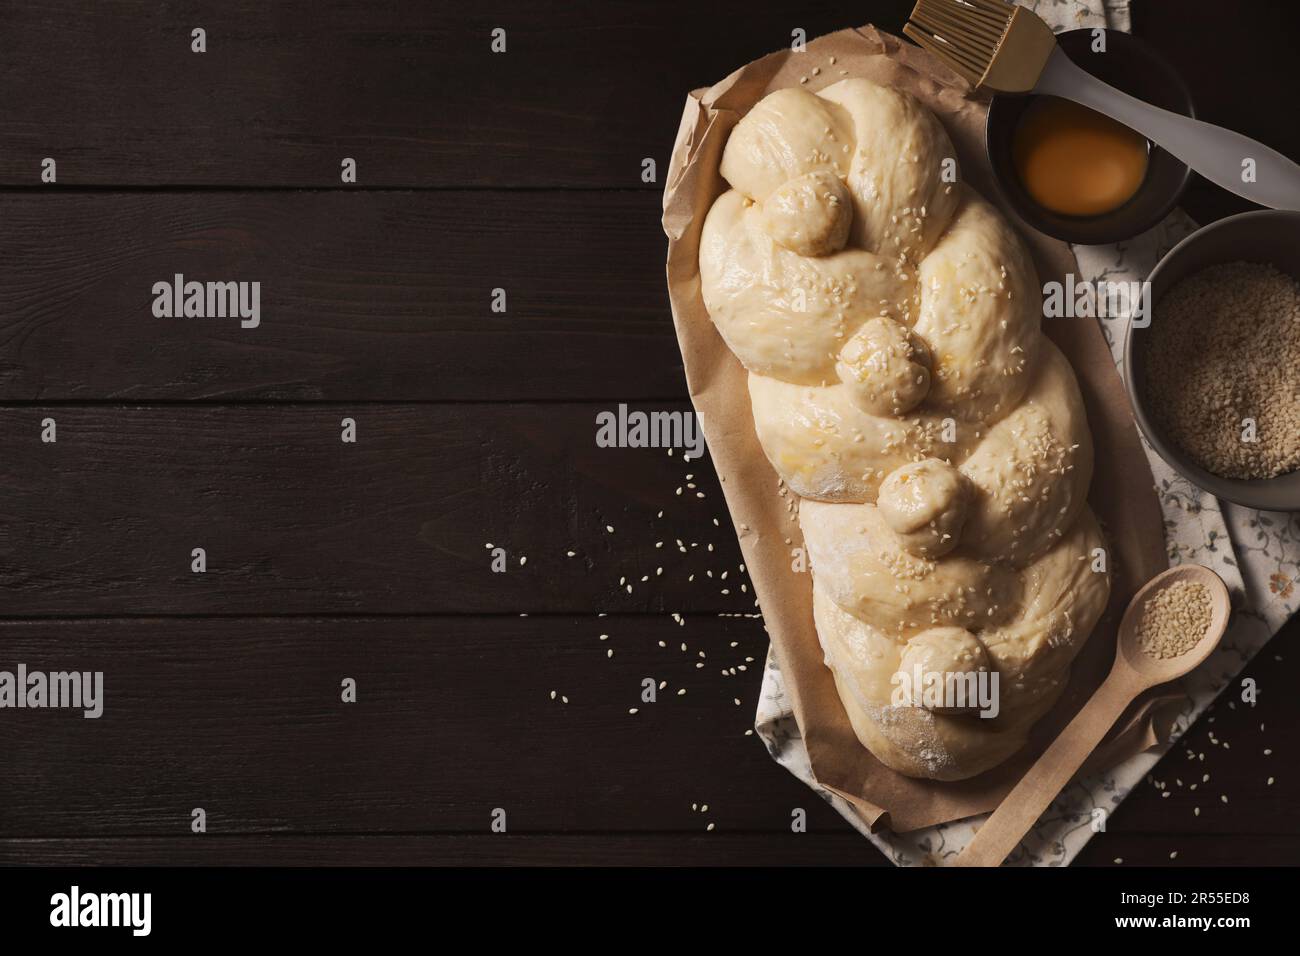 https://c8.alamy.com/comp/2R55ED8/raw-braided-bread-ingredients-and-pastry-brush-on-black-wooden-table-flat-lay-with-space-for-text-traditional-shabbat-challah-2R55ED8.jpg